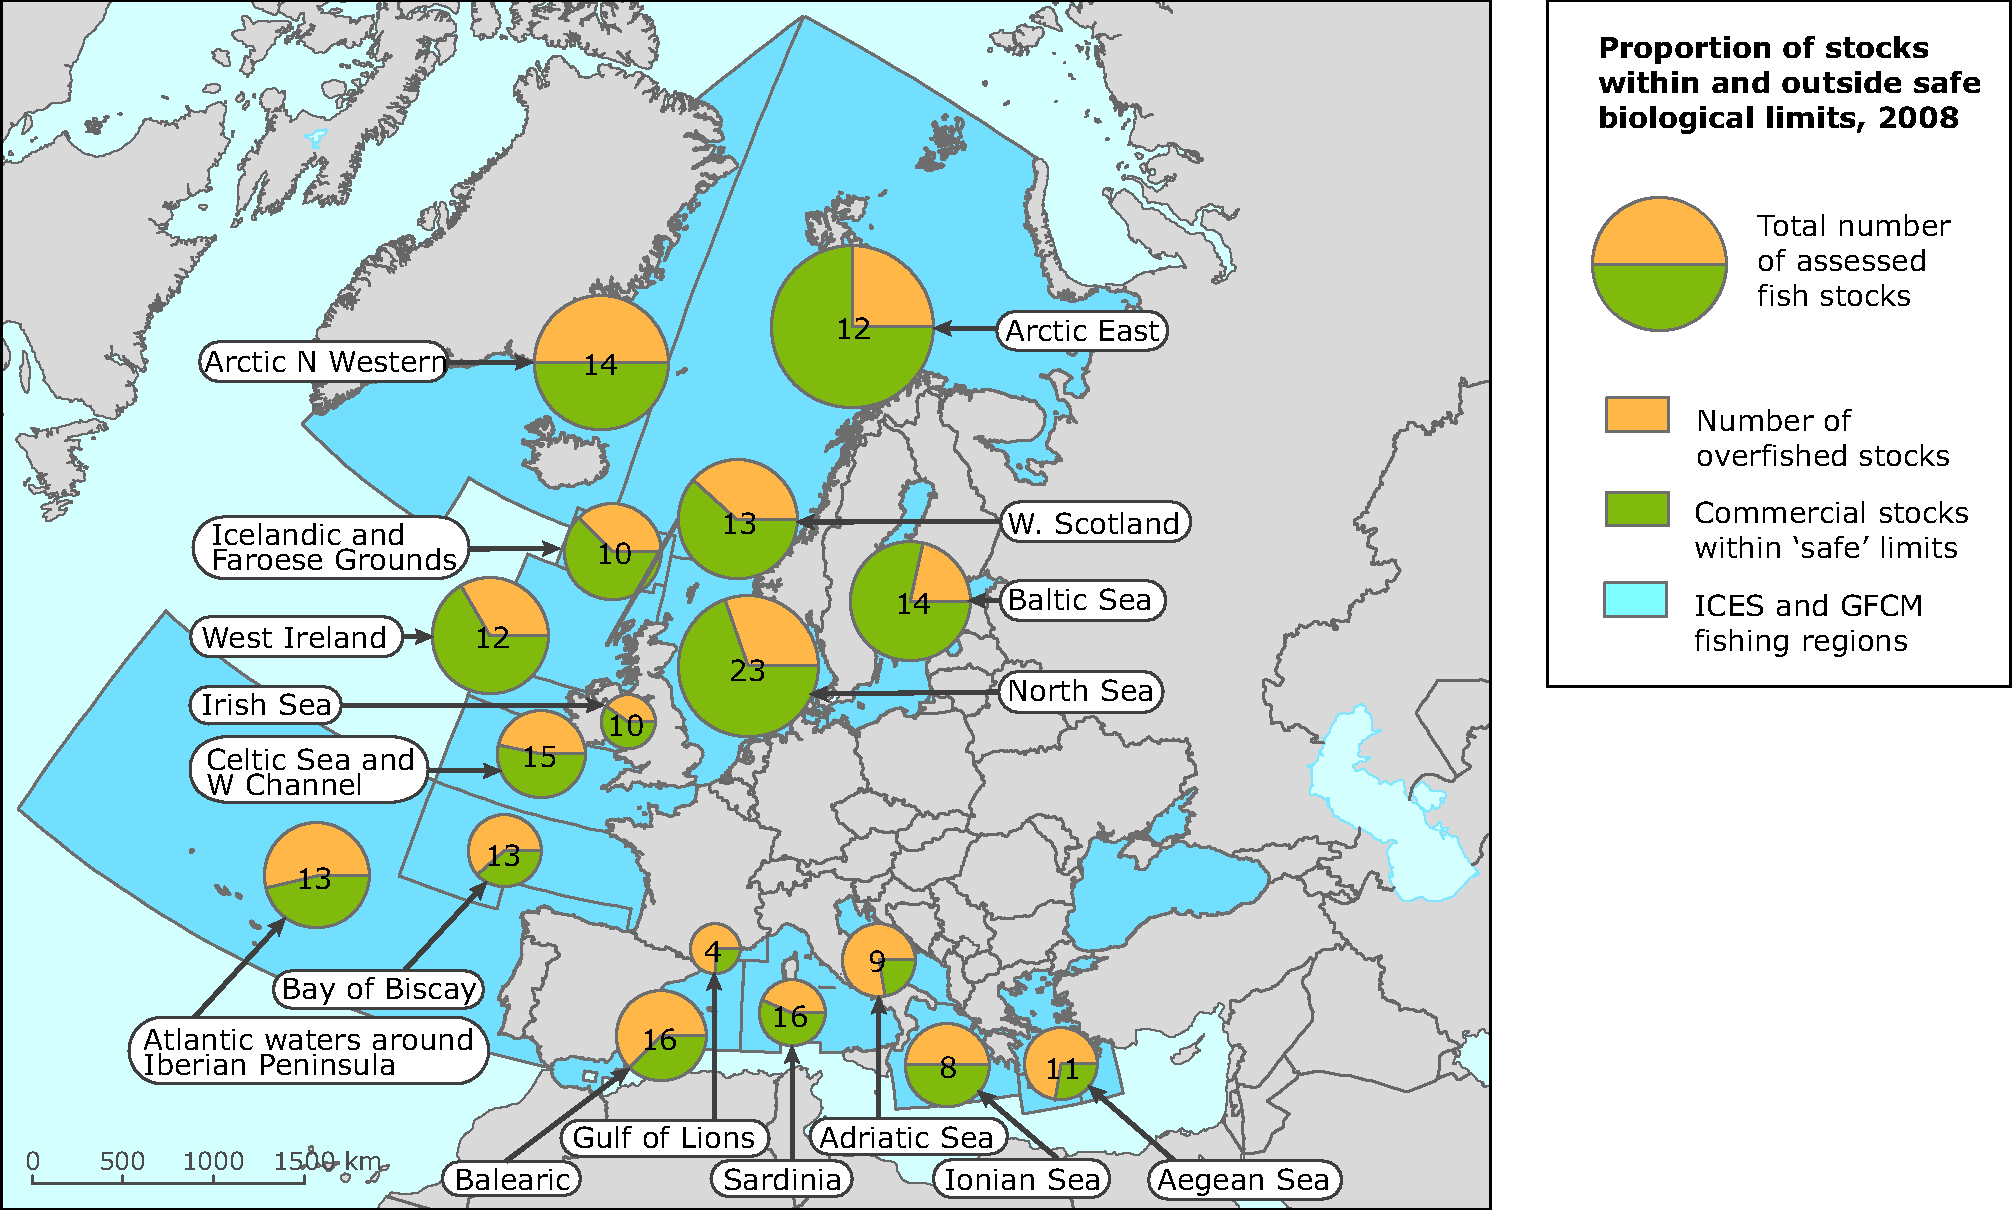 Status of fish stocks in International Council for Exploration of the Sea (ICES) and General Fisheries Commission for the Mediterranean (GFCM) fishing regions of Europe